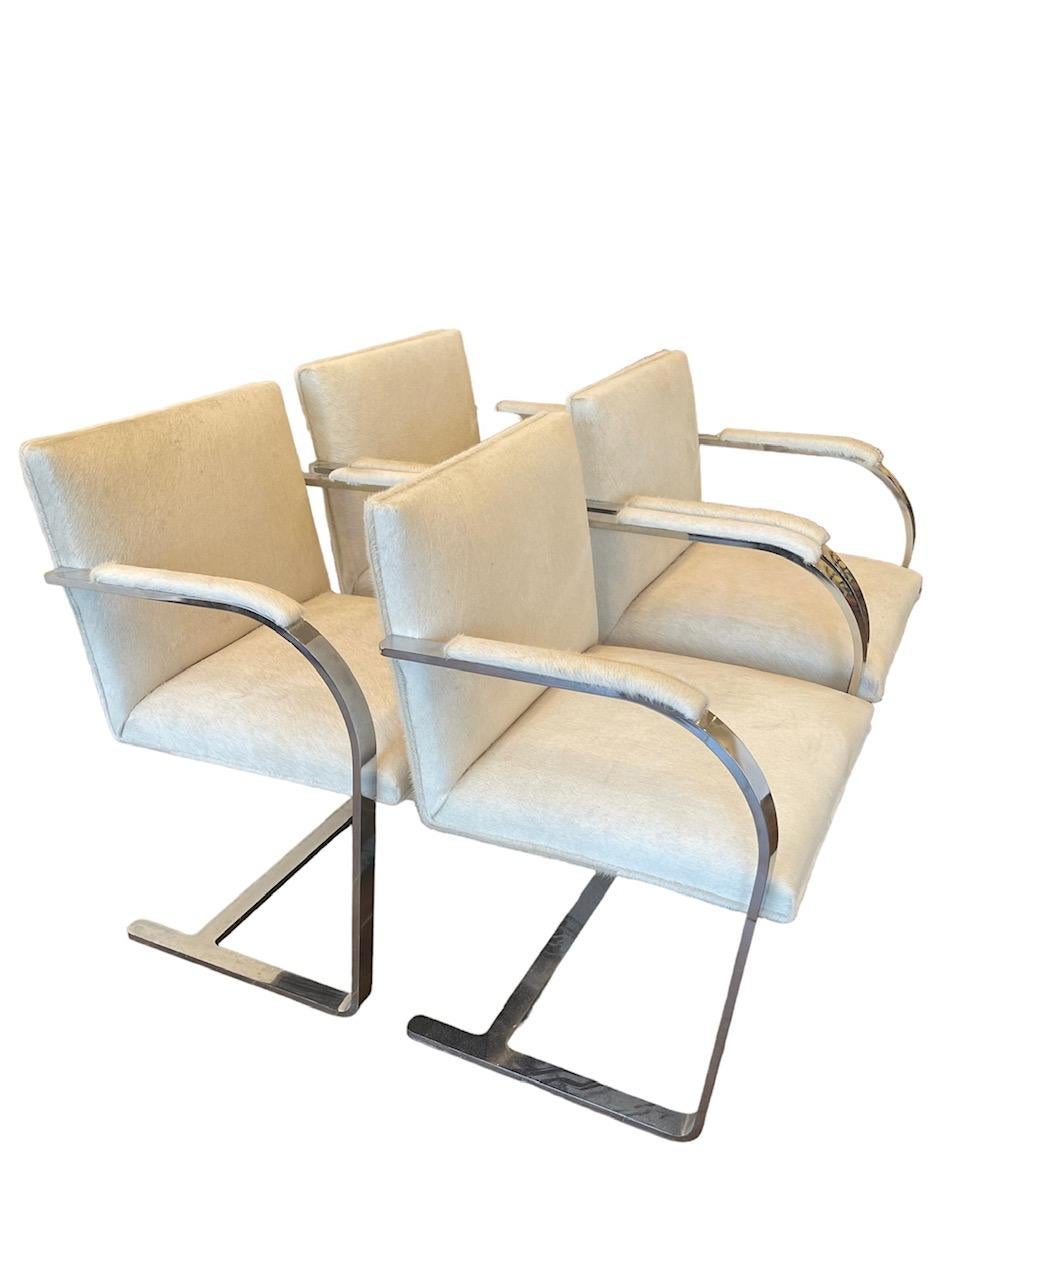 Mid-20th Century Mies Van Der Rohe Calfskin Brno Chairs Set of 4 For Sale